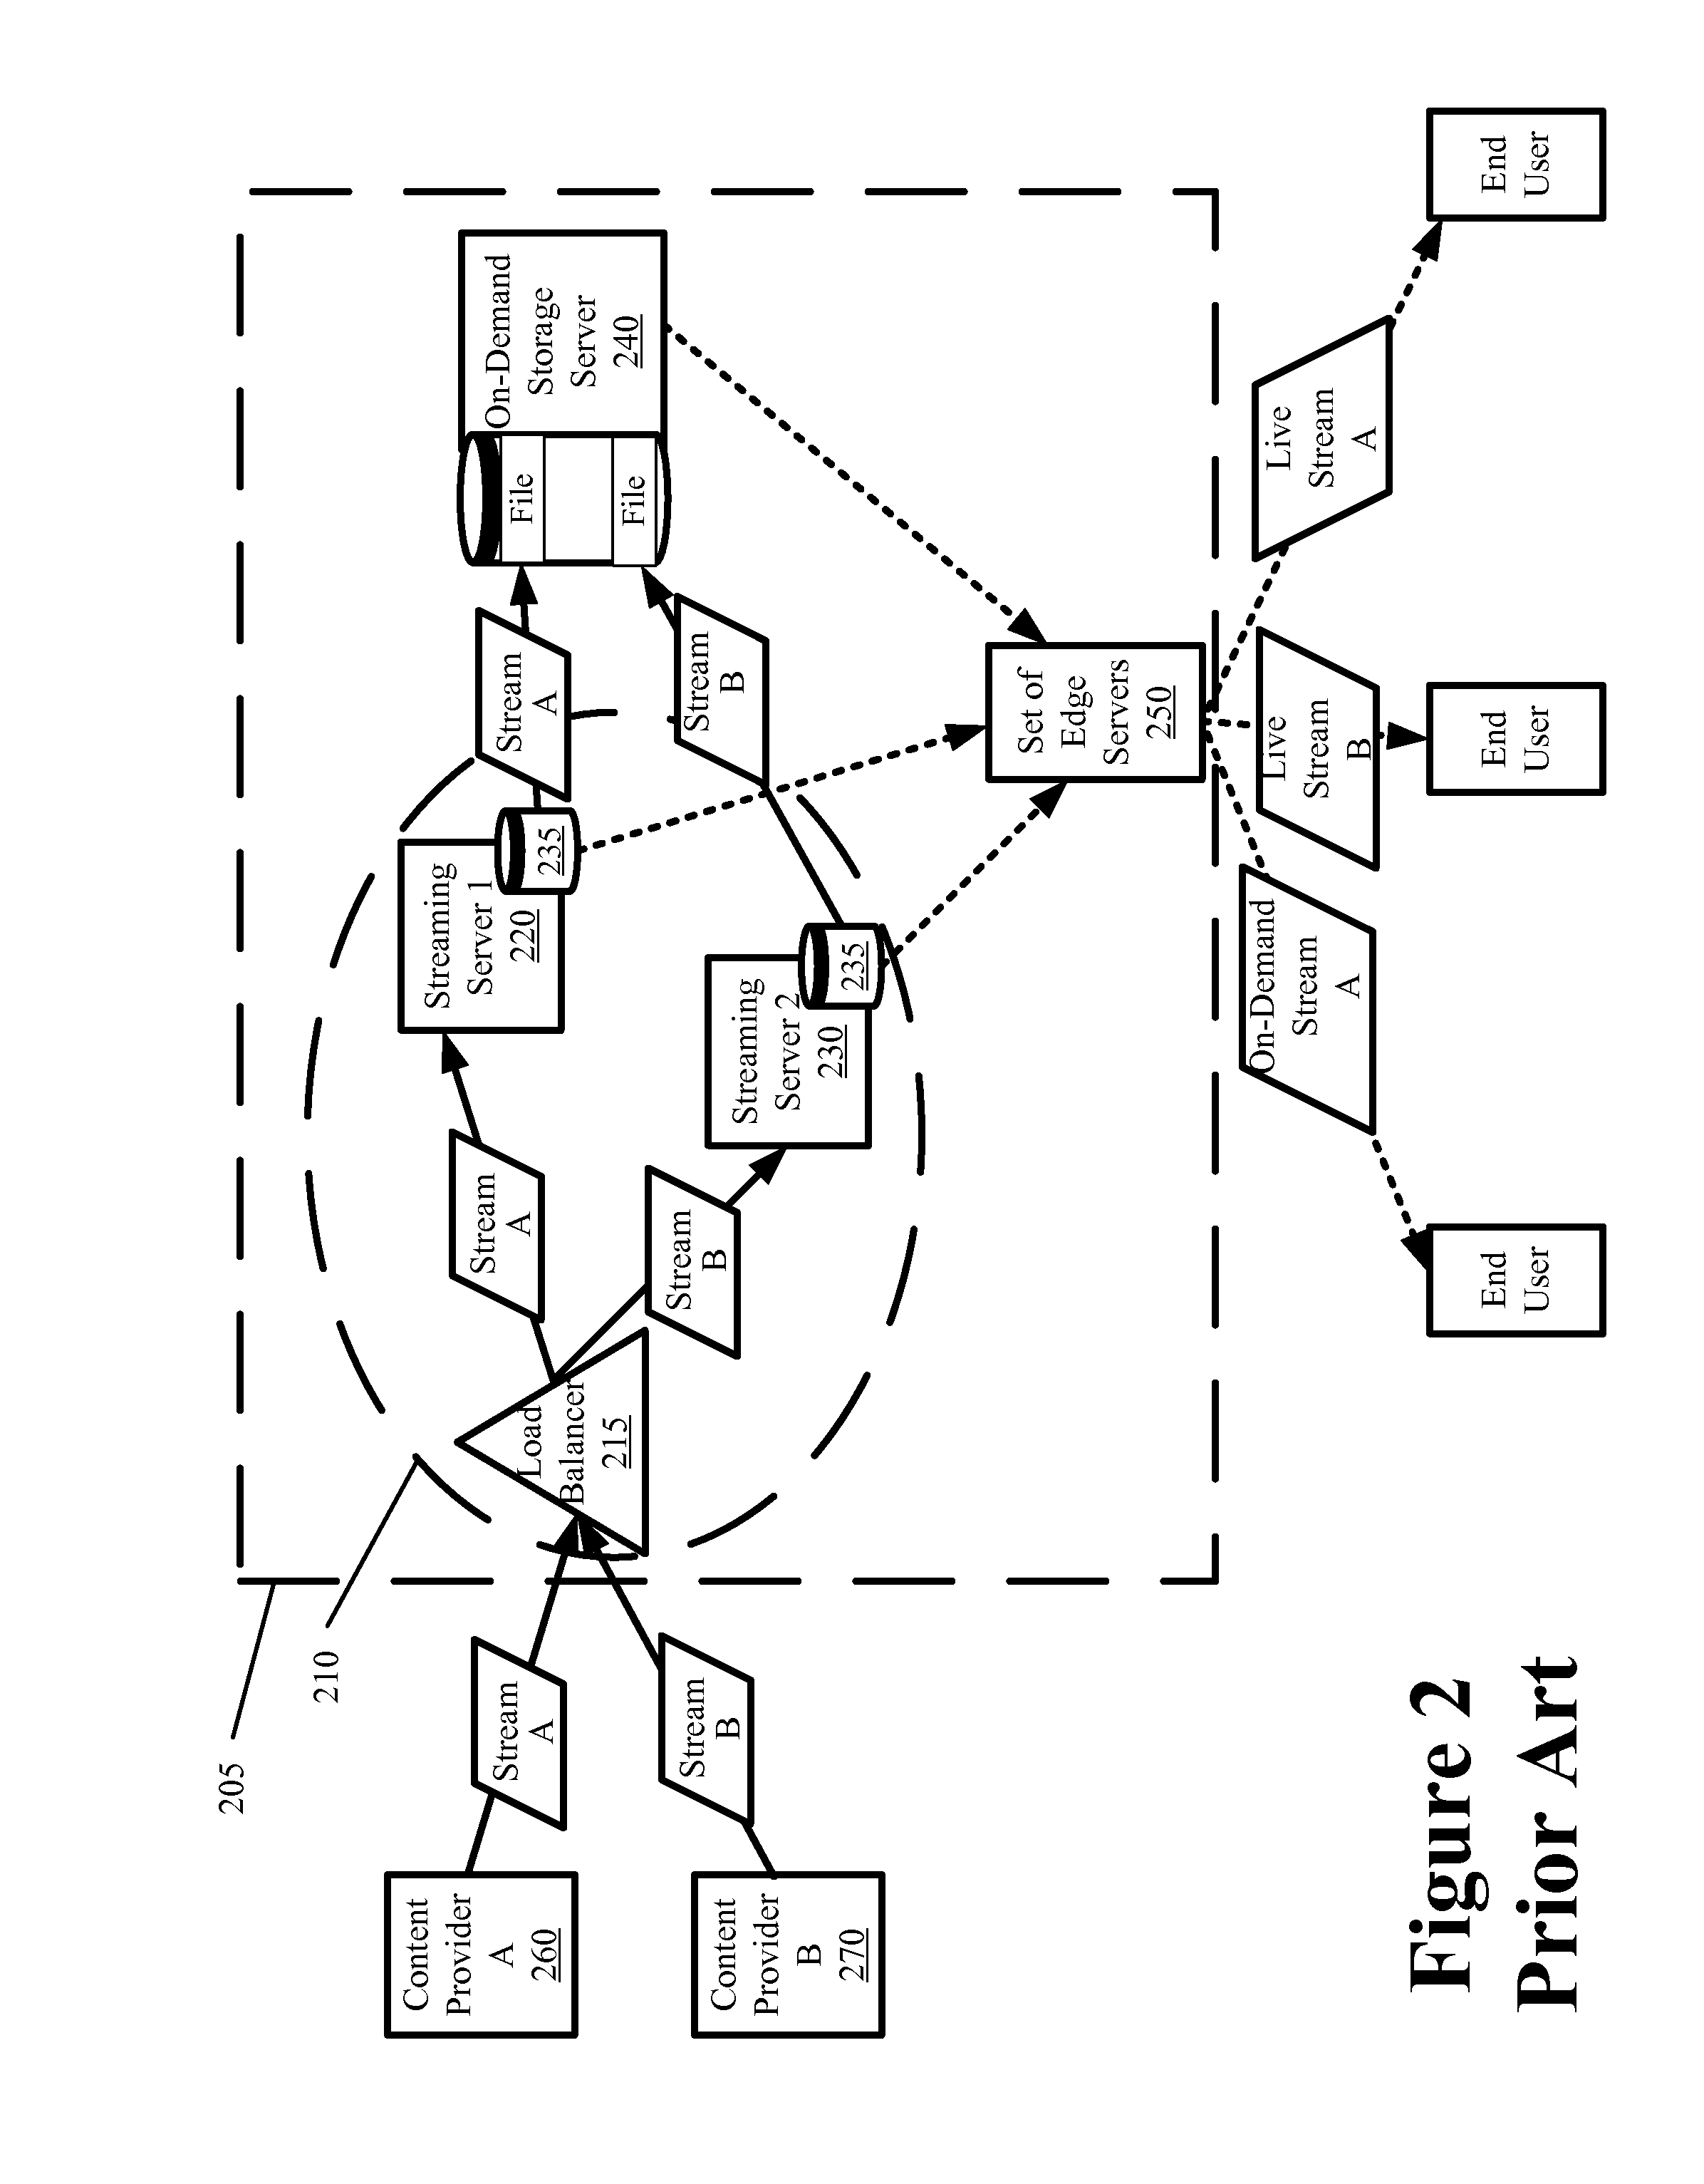 Scalable Content Streaming System with Server-Side Archiving